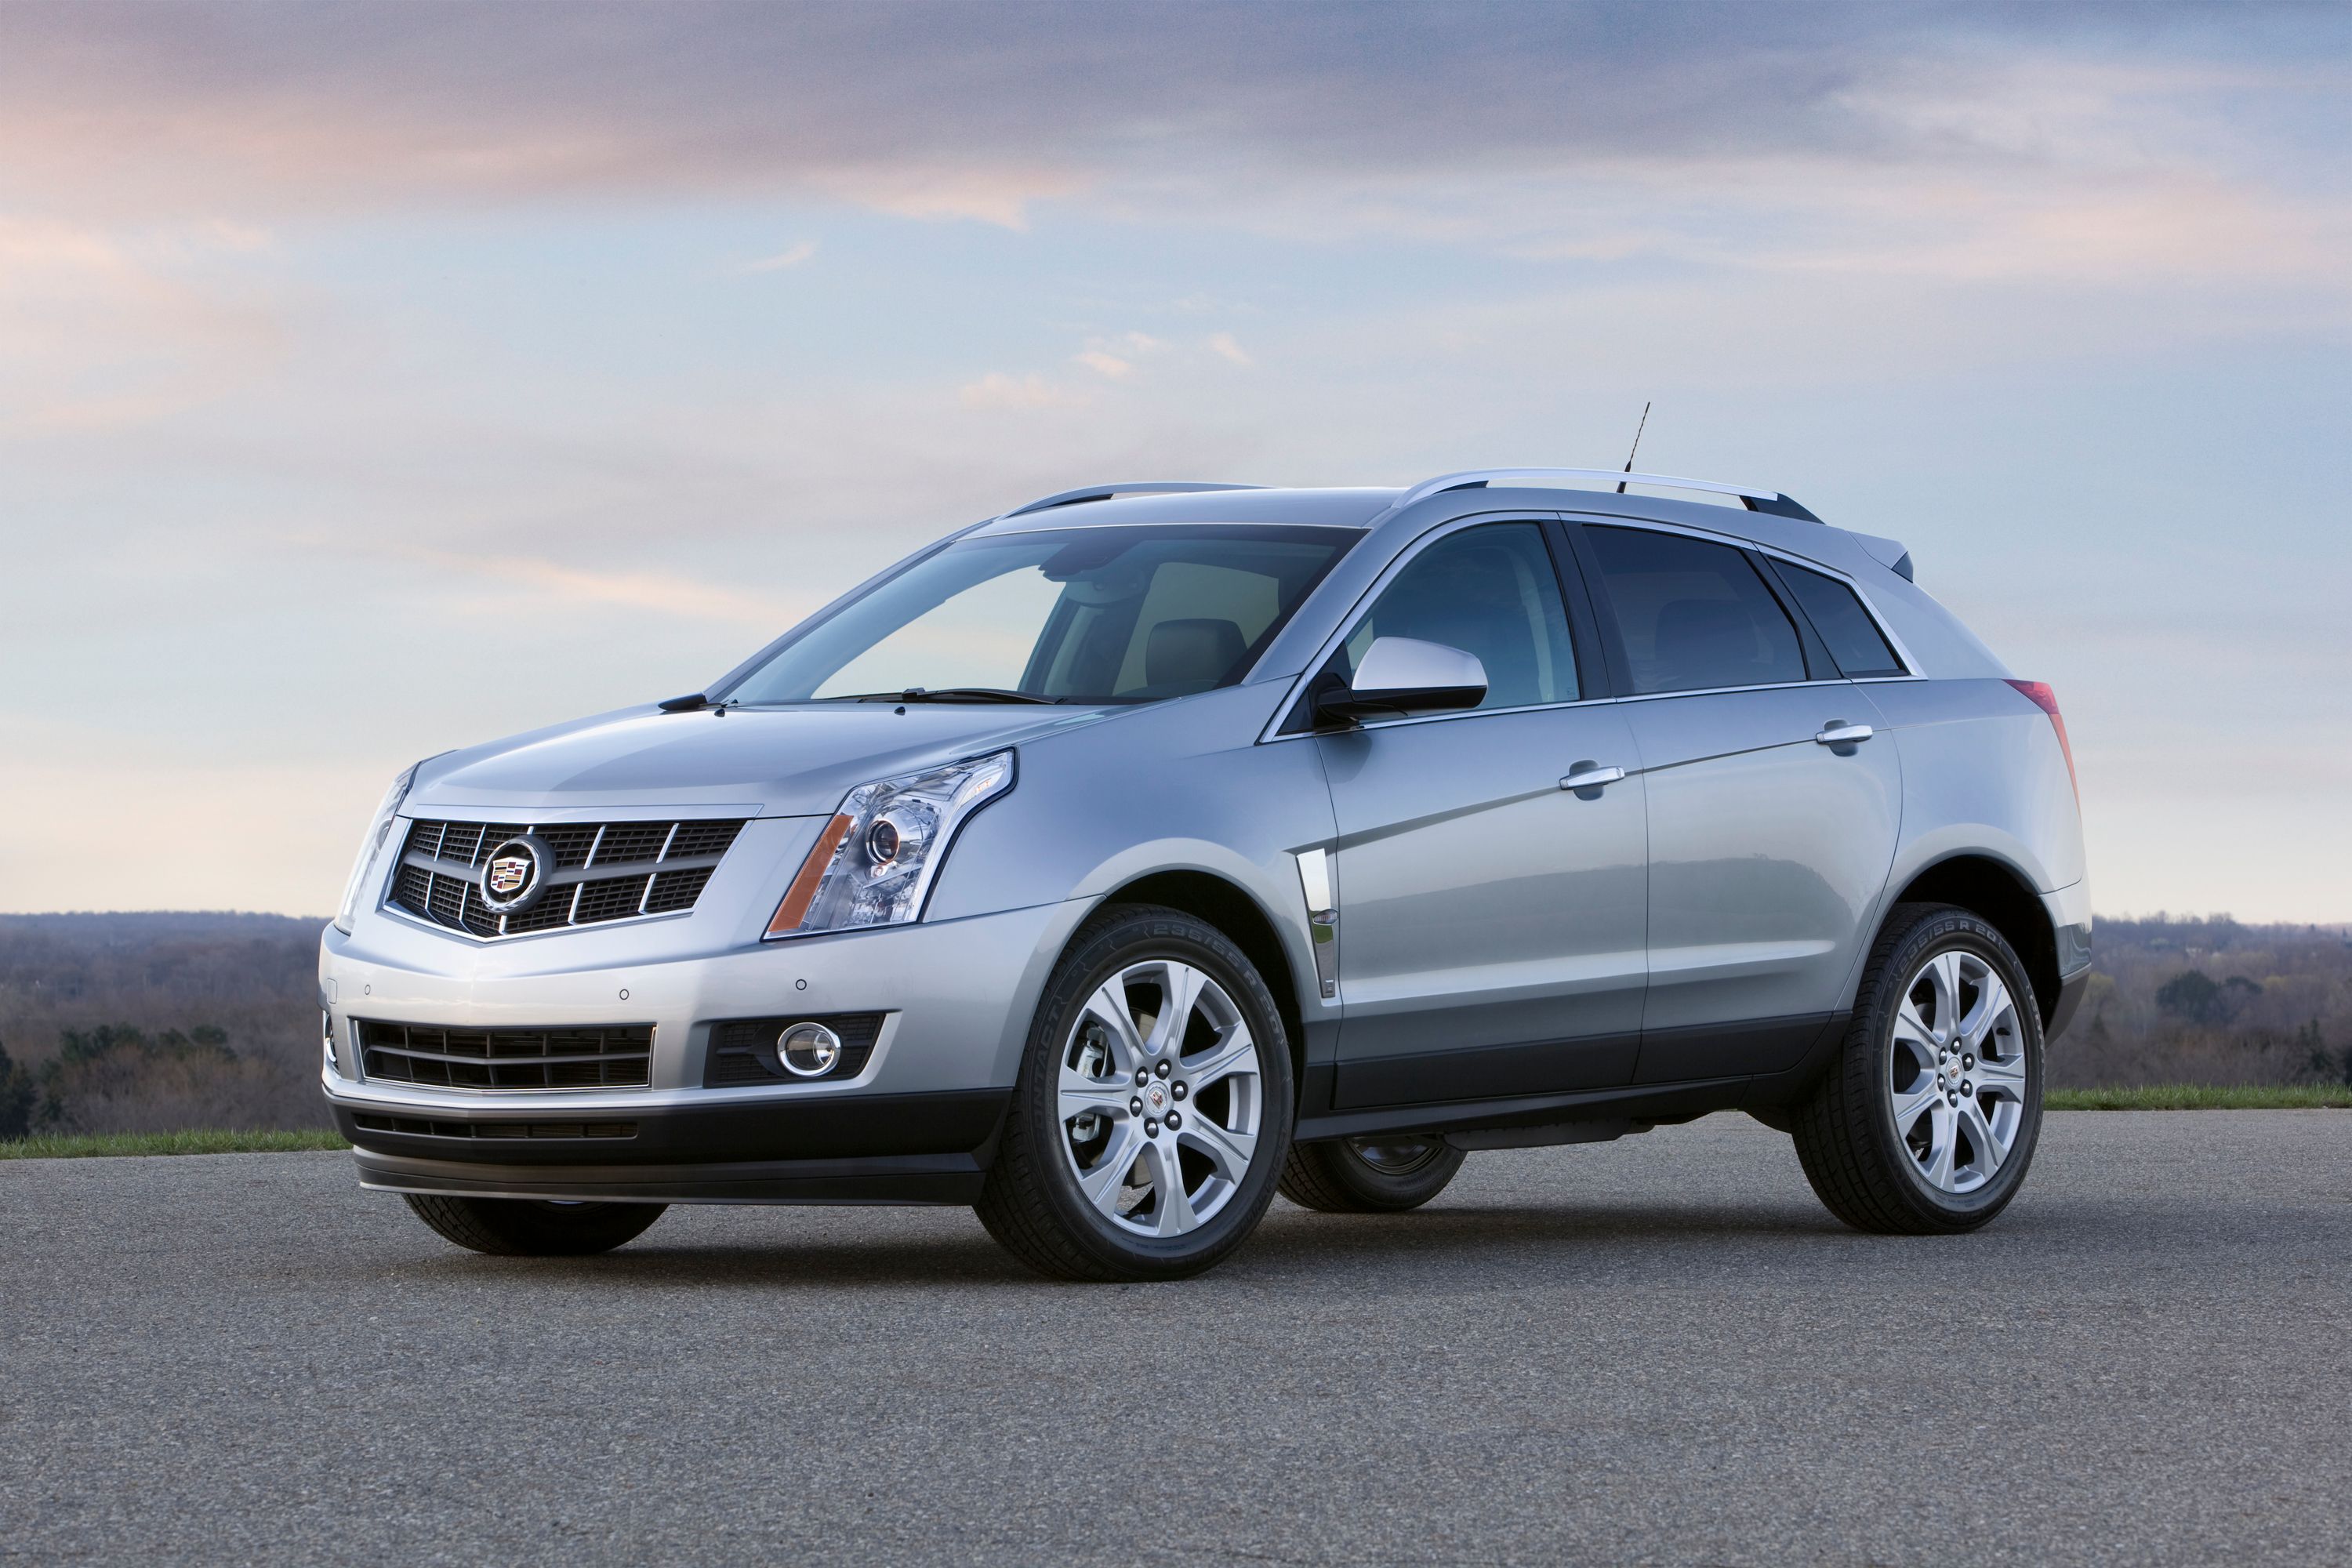 Silver 2010 Cadillac SRX on the road